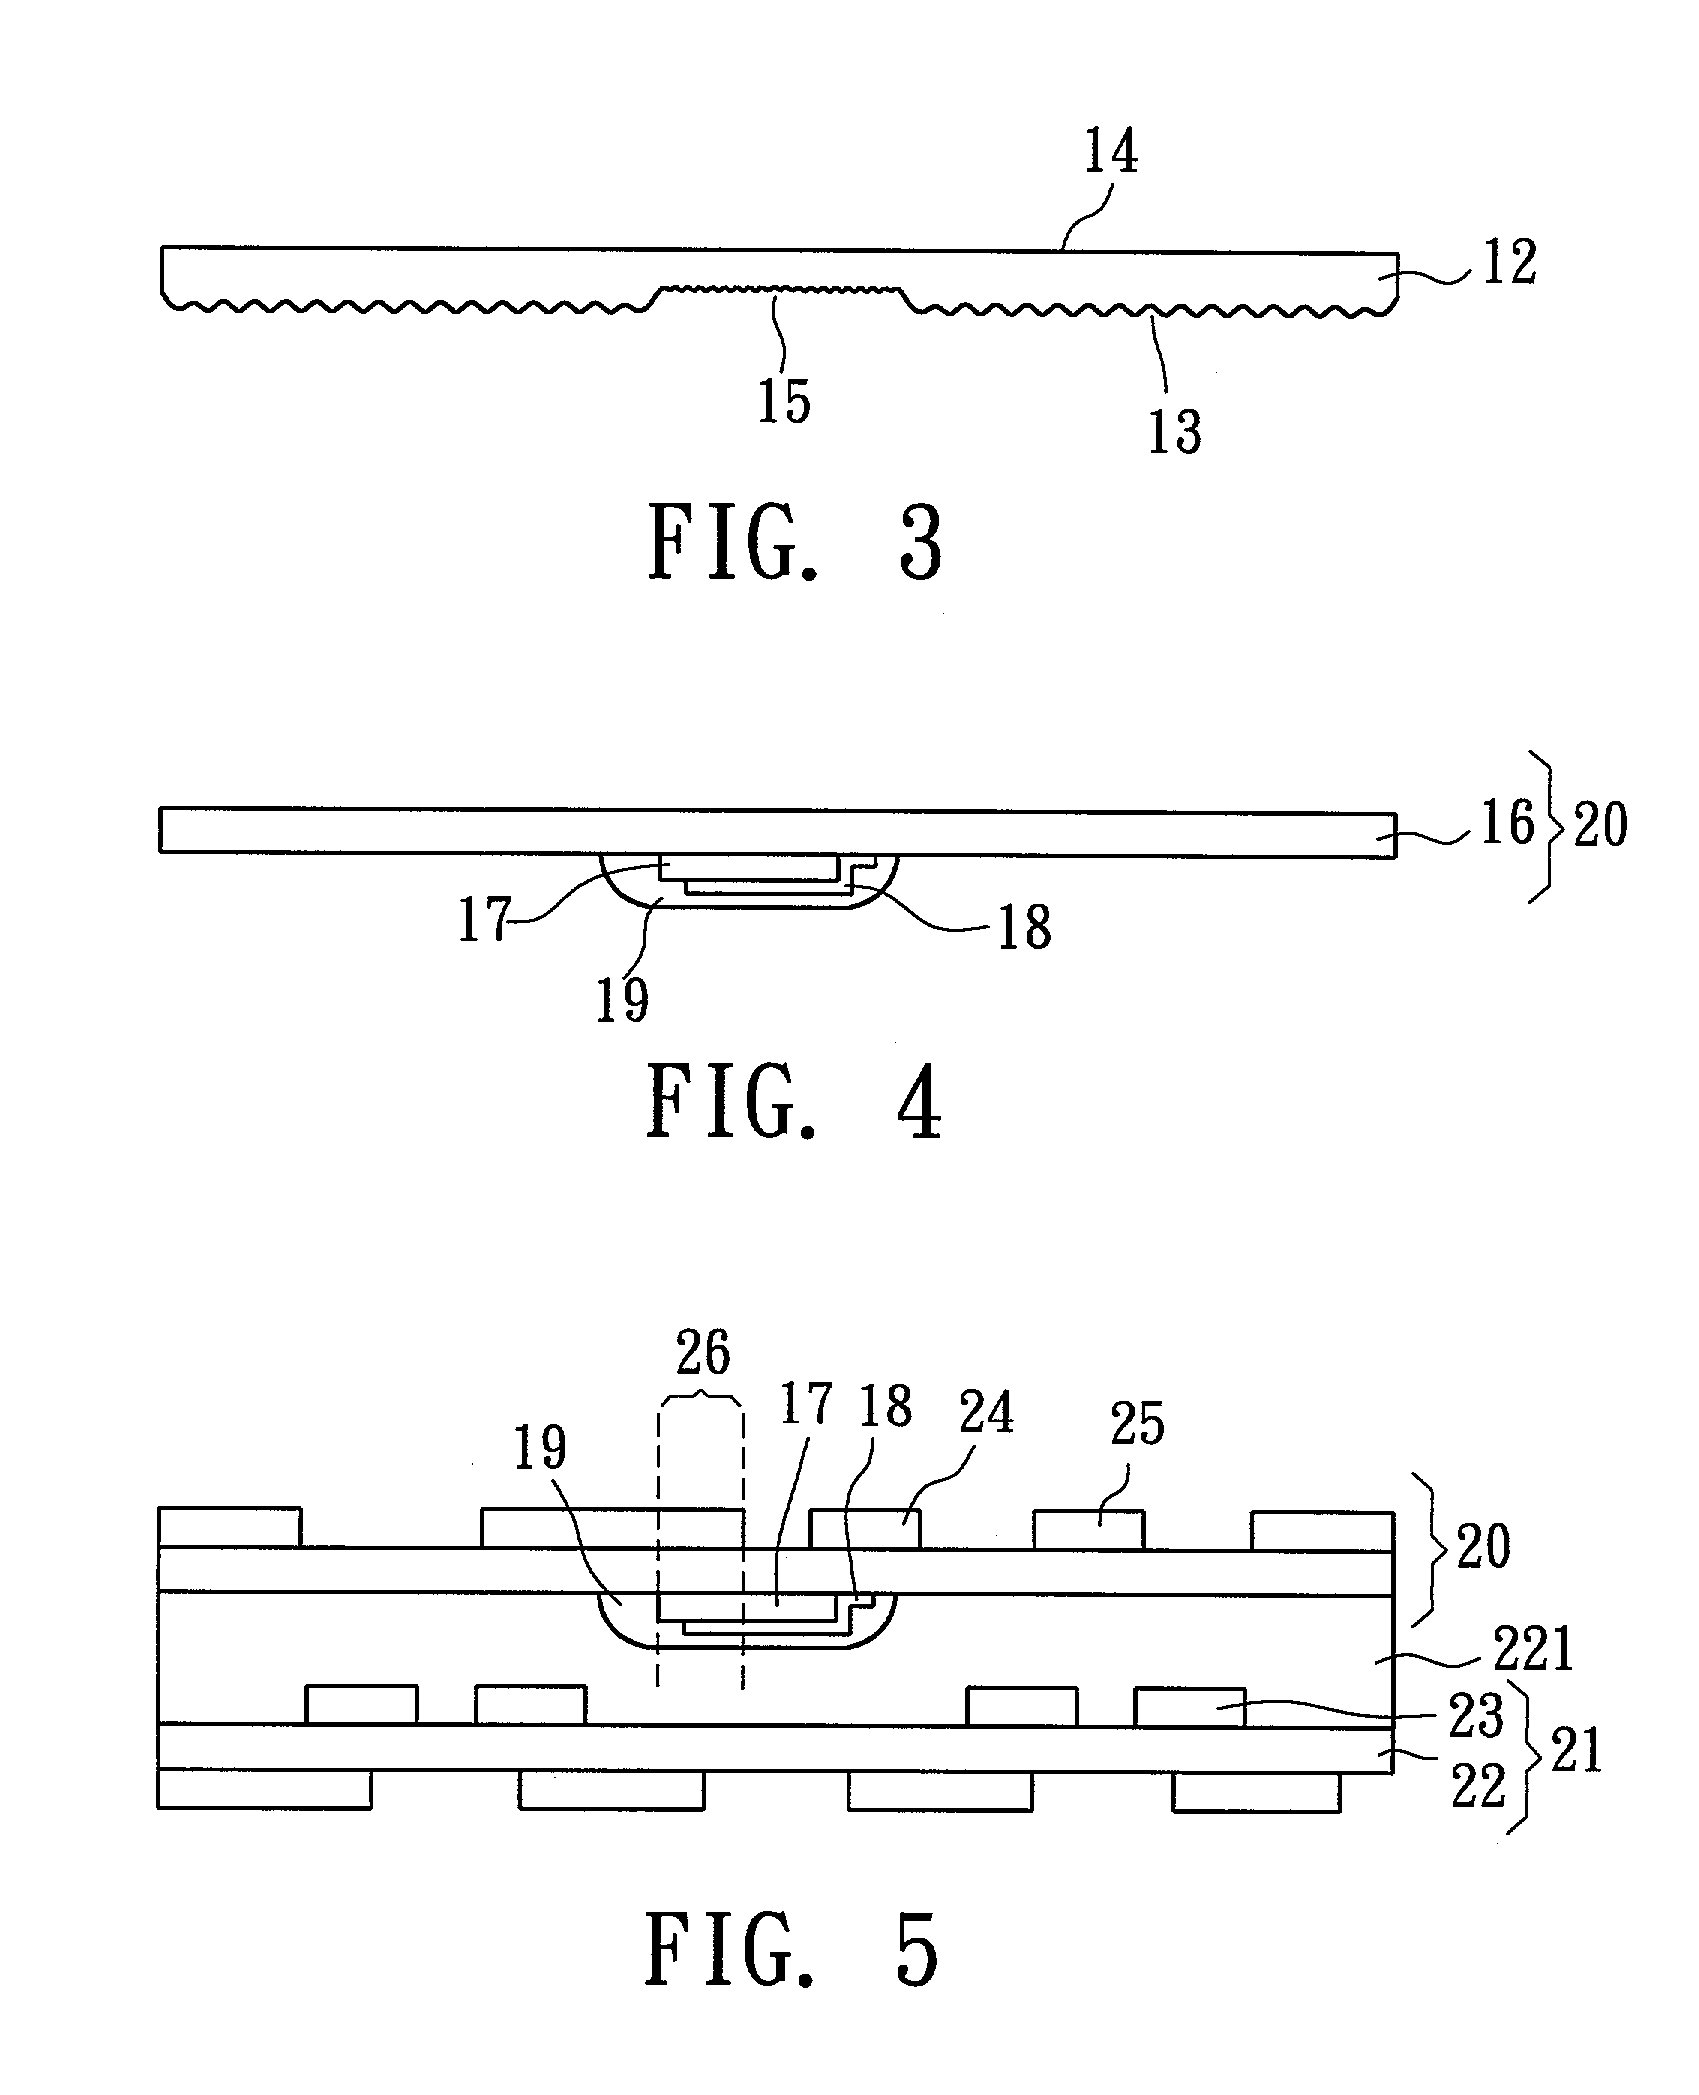 Lamination method of embedding passive components in an organic circuit board